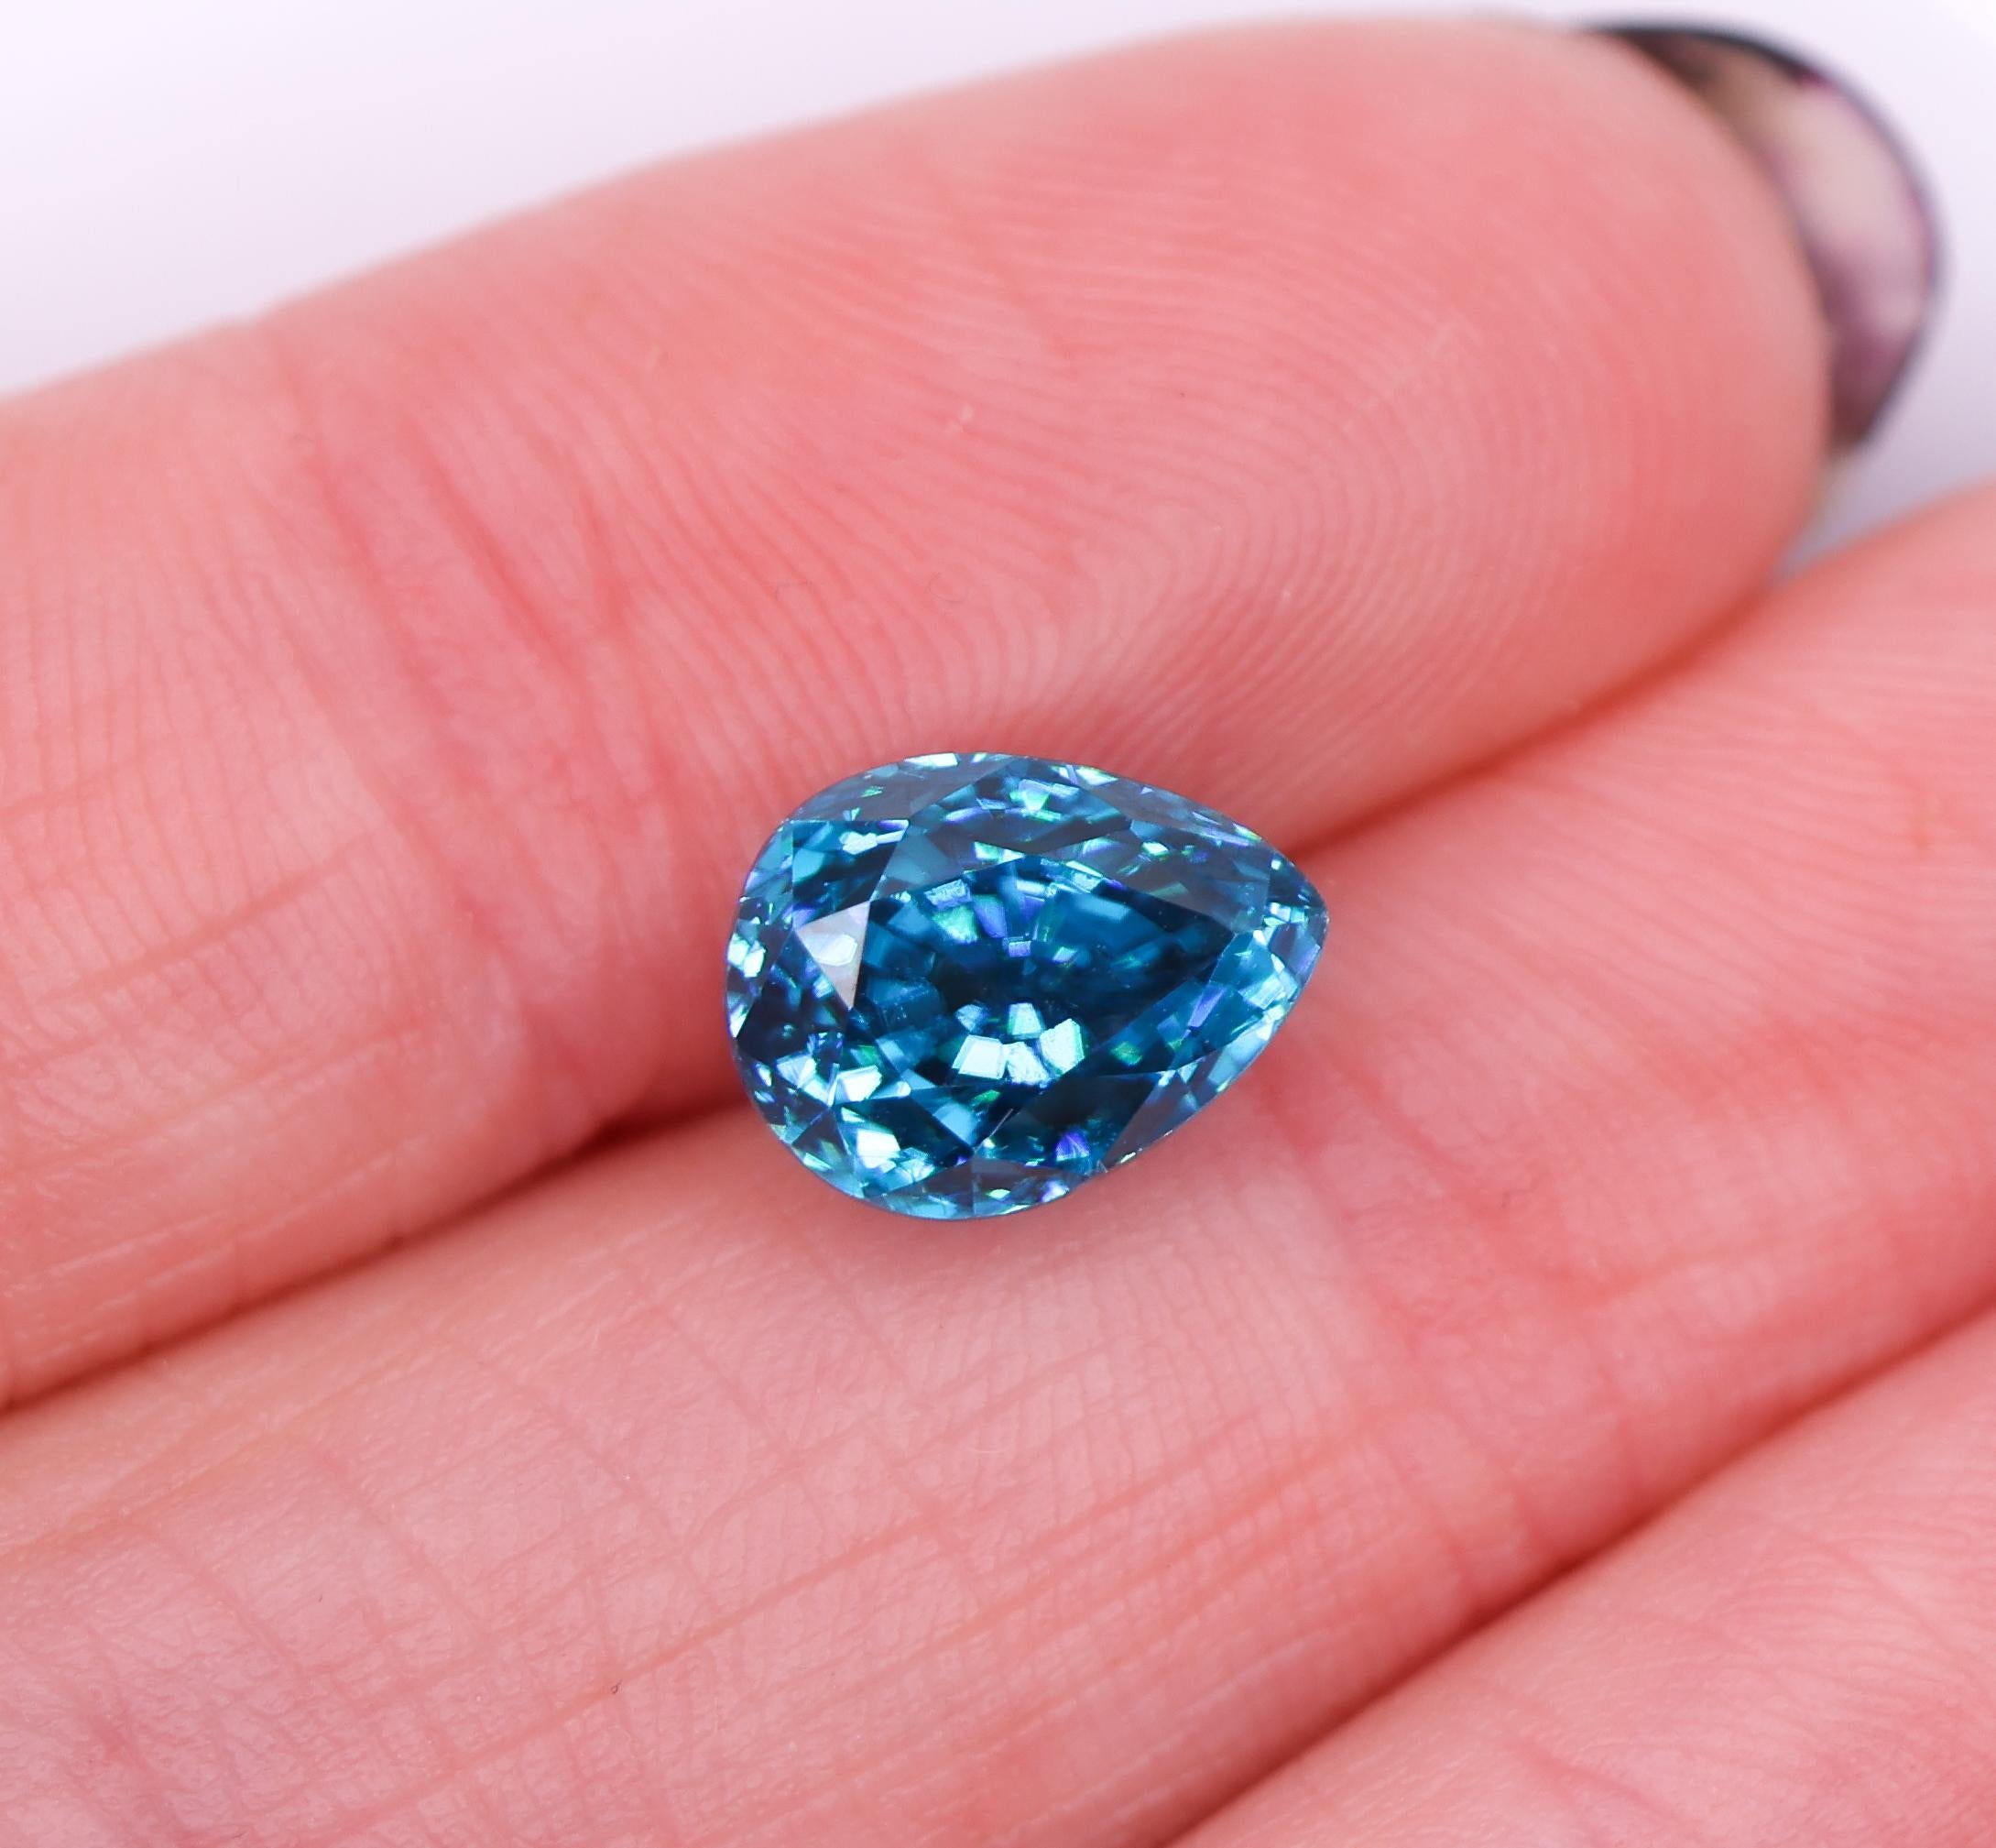 A gorgeous pear shape blue zircon looking for it's next home. If you feel a sparkle of excitement seeing this gem and want to design a one of a kind piece of jewelry, let us know!

Cambodian Zircon is the perfect eco-friendly alternative to